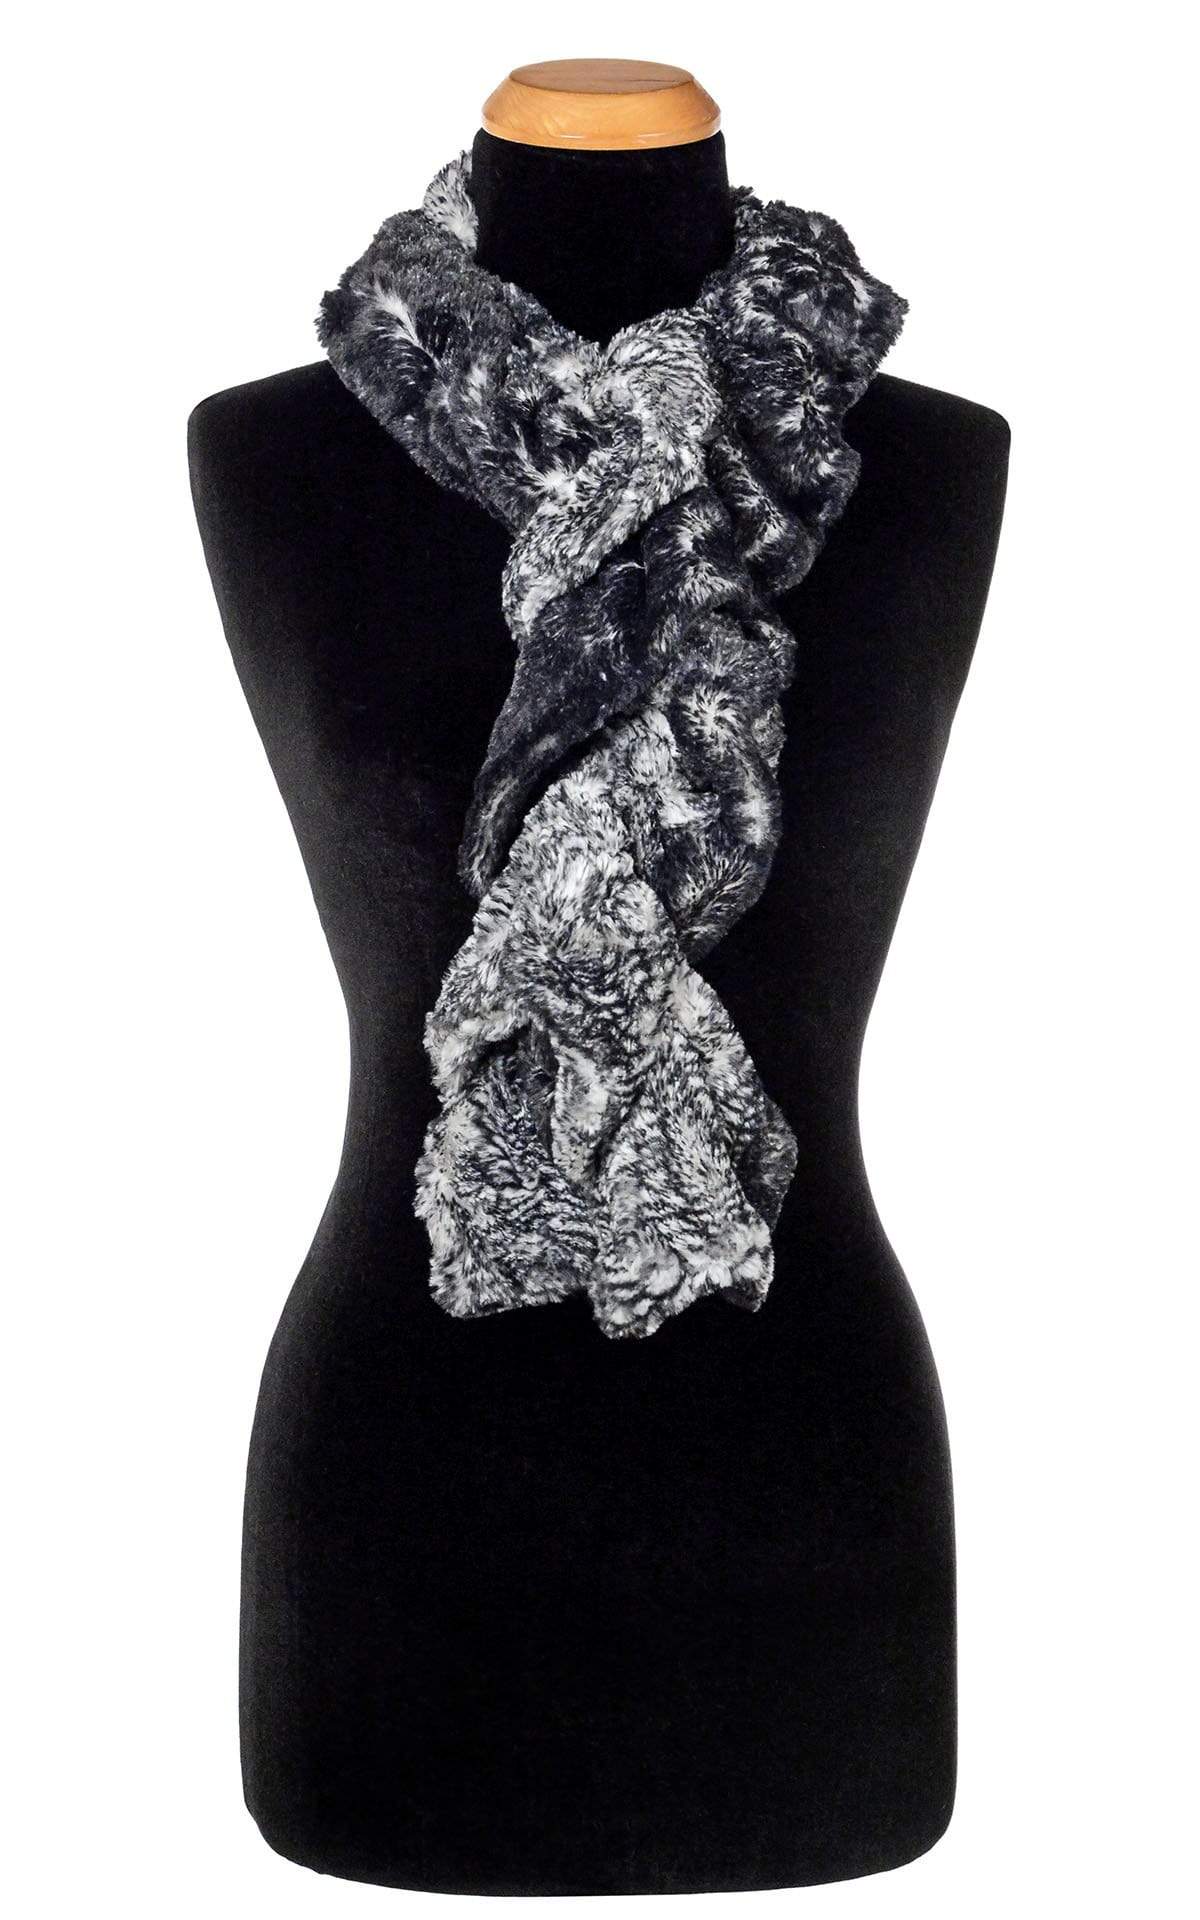 Product shot of Women’s Scrunchy Scarf shown twisted | Black Mamba Snake Print in Black and Ivory | Handmade in Seattle WA | Pandemonium Millinery